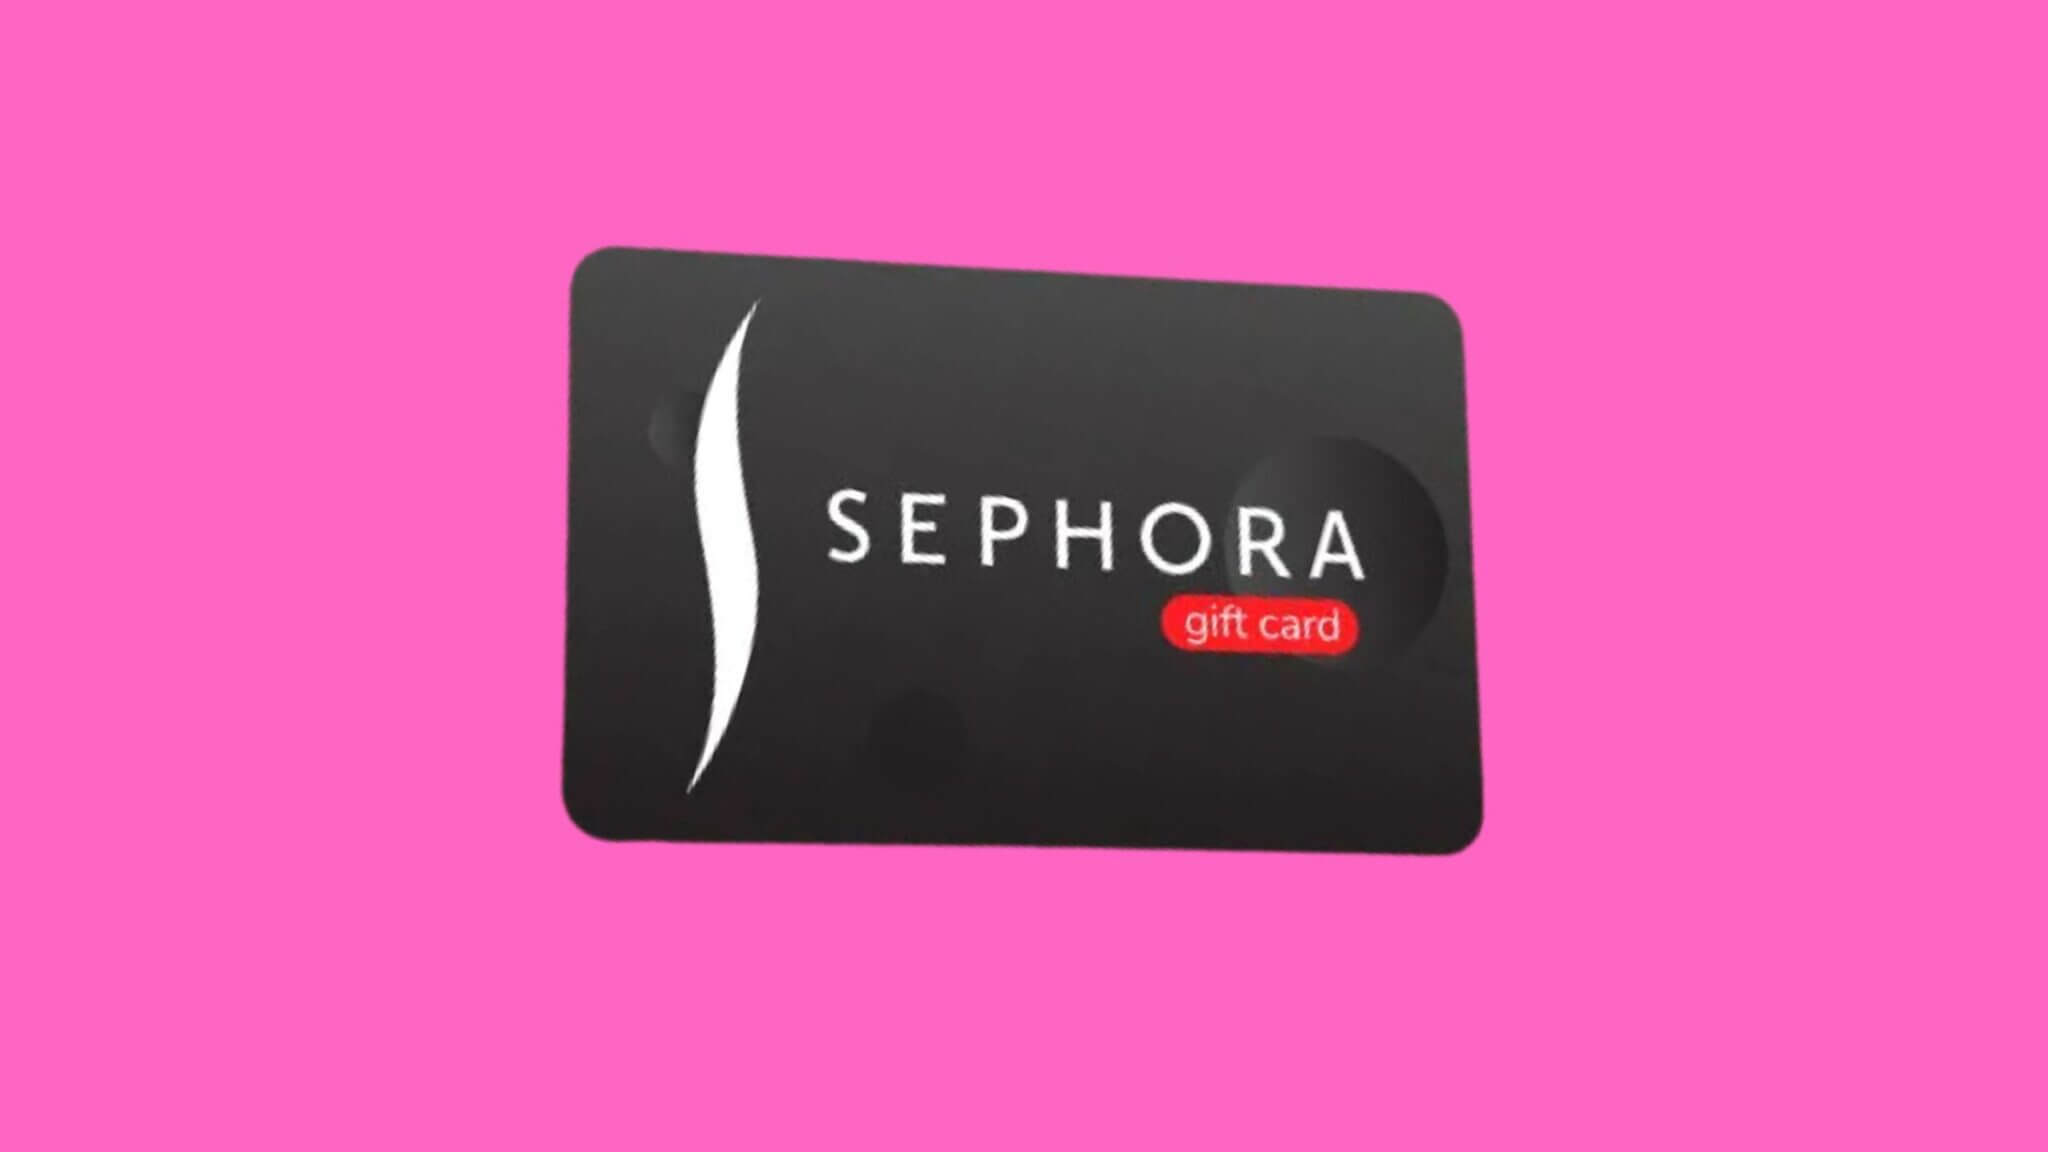 Sell Sephora gift cards for cash